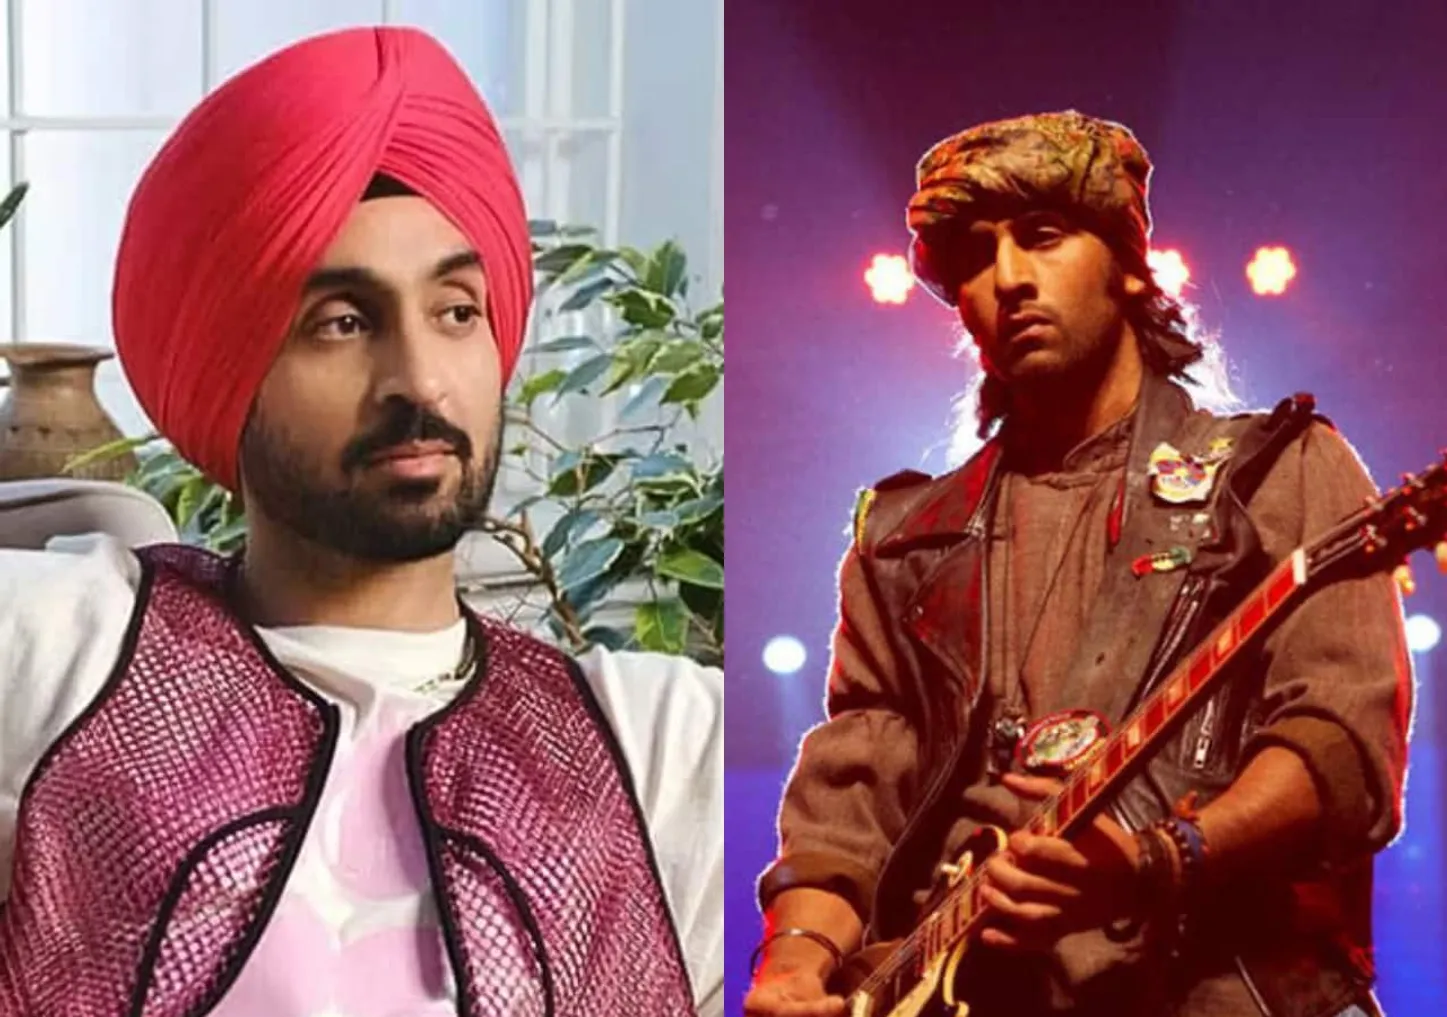 Diljit Dosanjh says he tried finding his inner pain after watching Ranbir  Kapoor in Rockstar; wondered 'How will I reach that level of Pagalpan?'